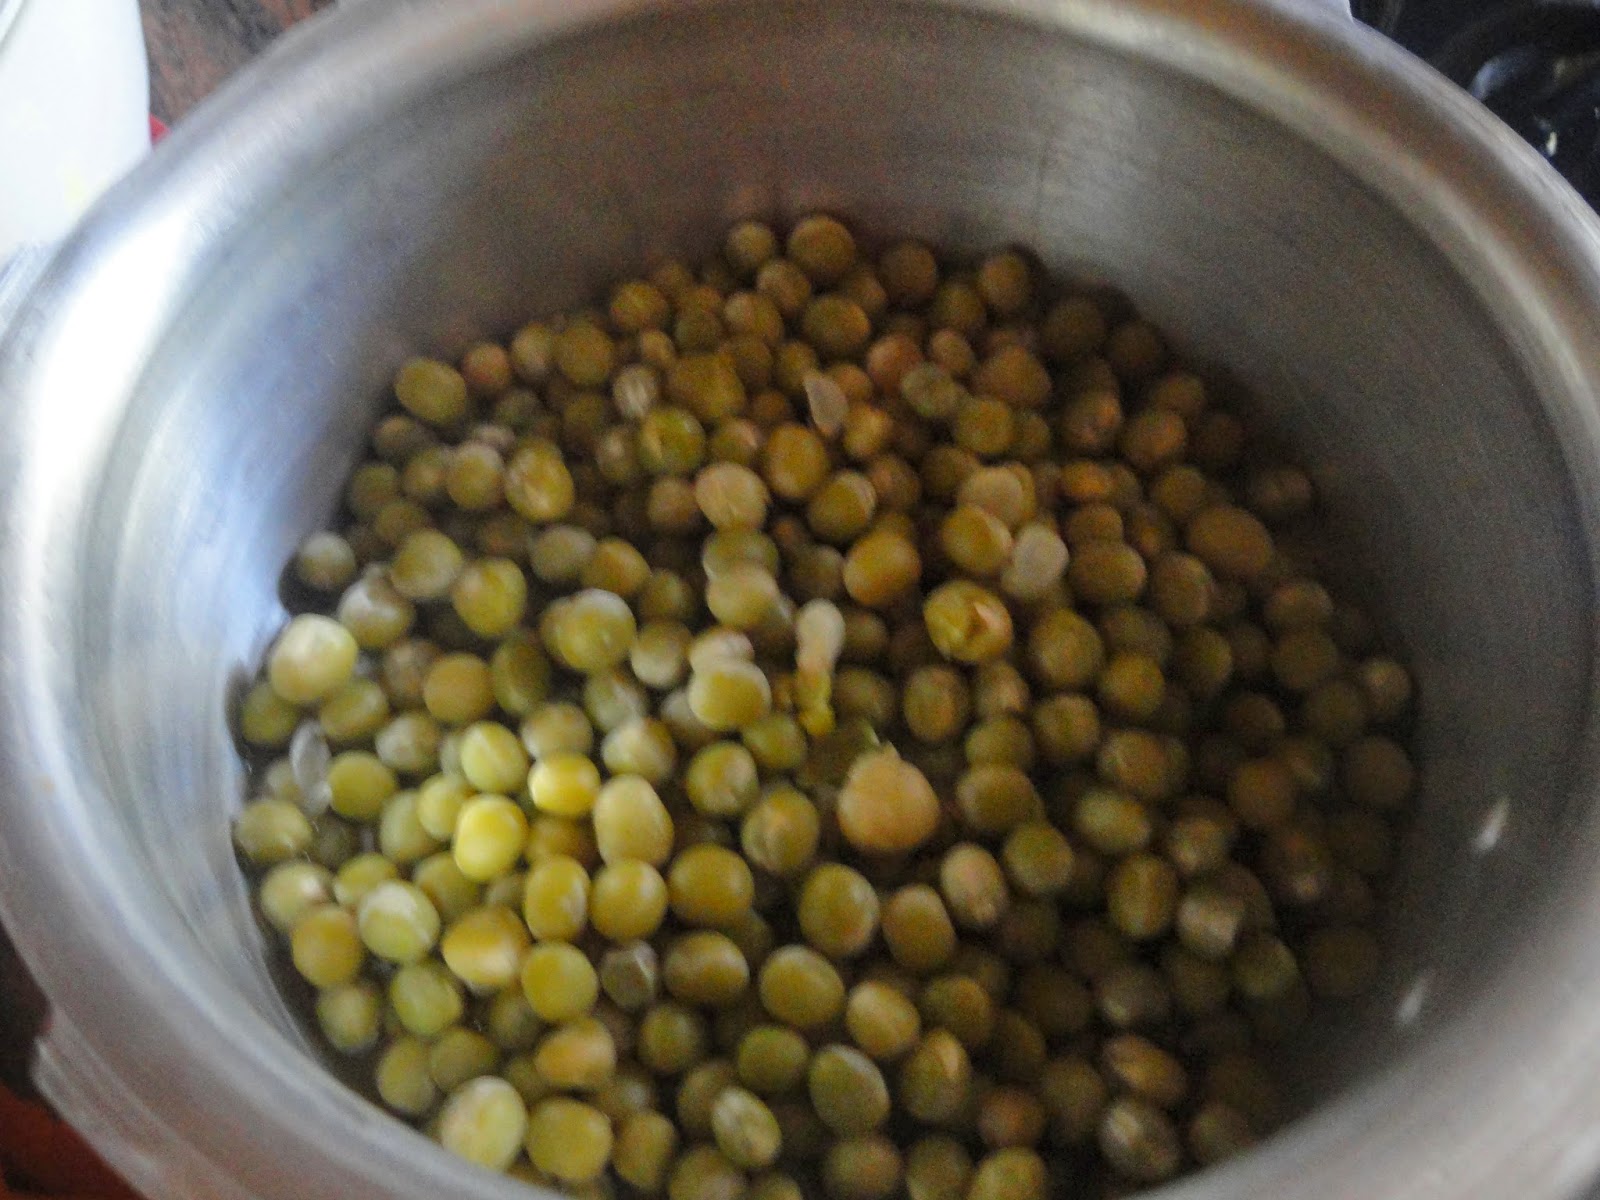 Pressure cooked dried peas